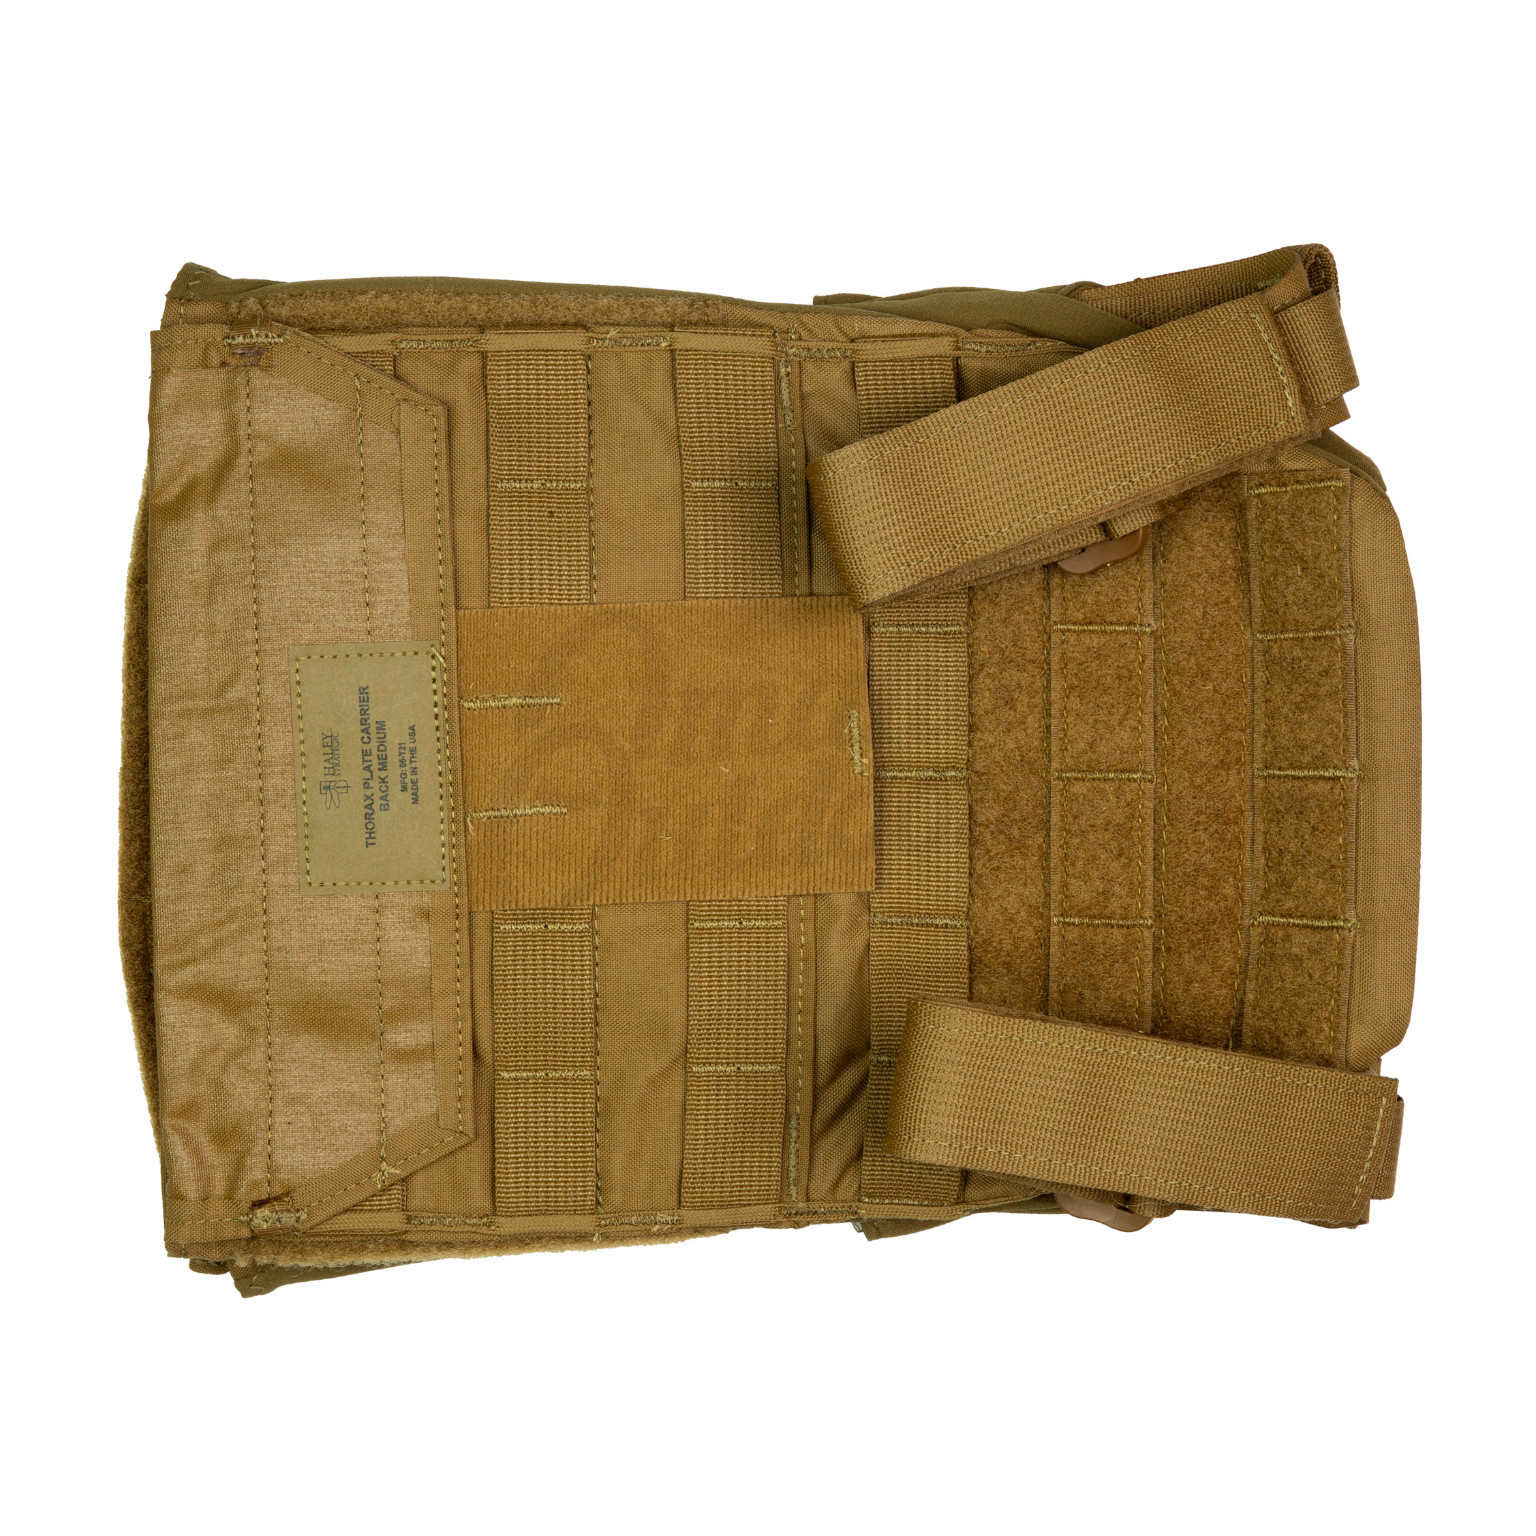 Haley Strategic THORAX Plate Carrier Coyote Brown Medium - Omaha Outdoors